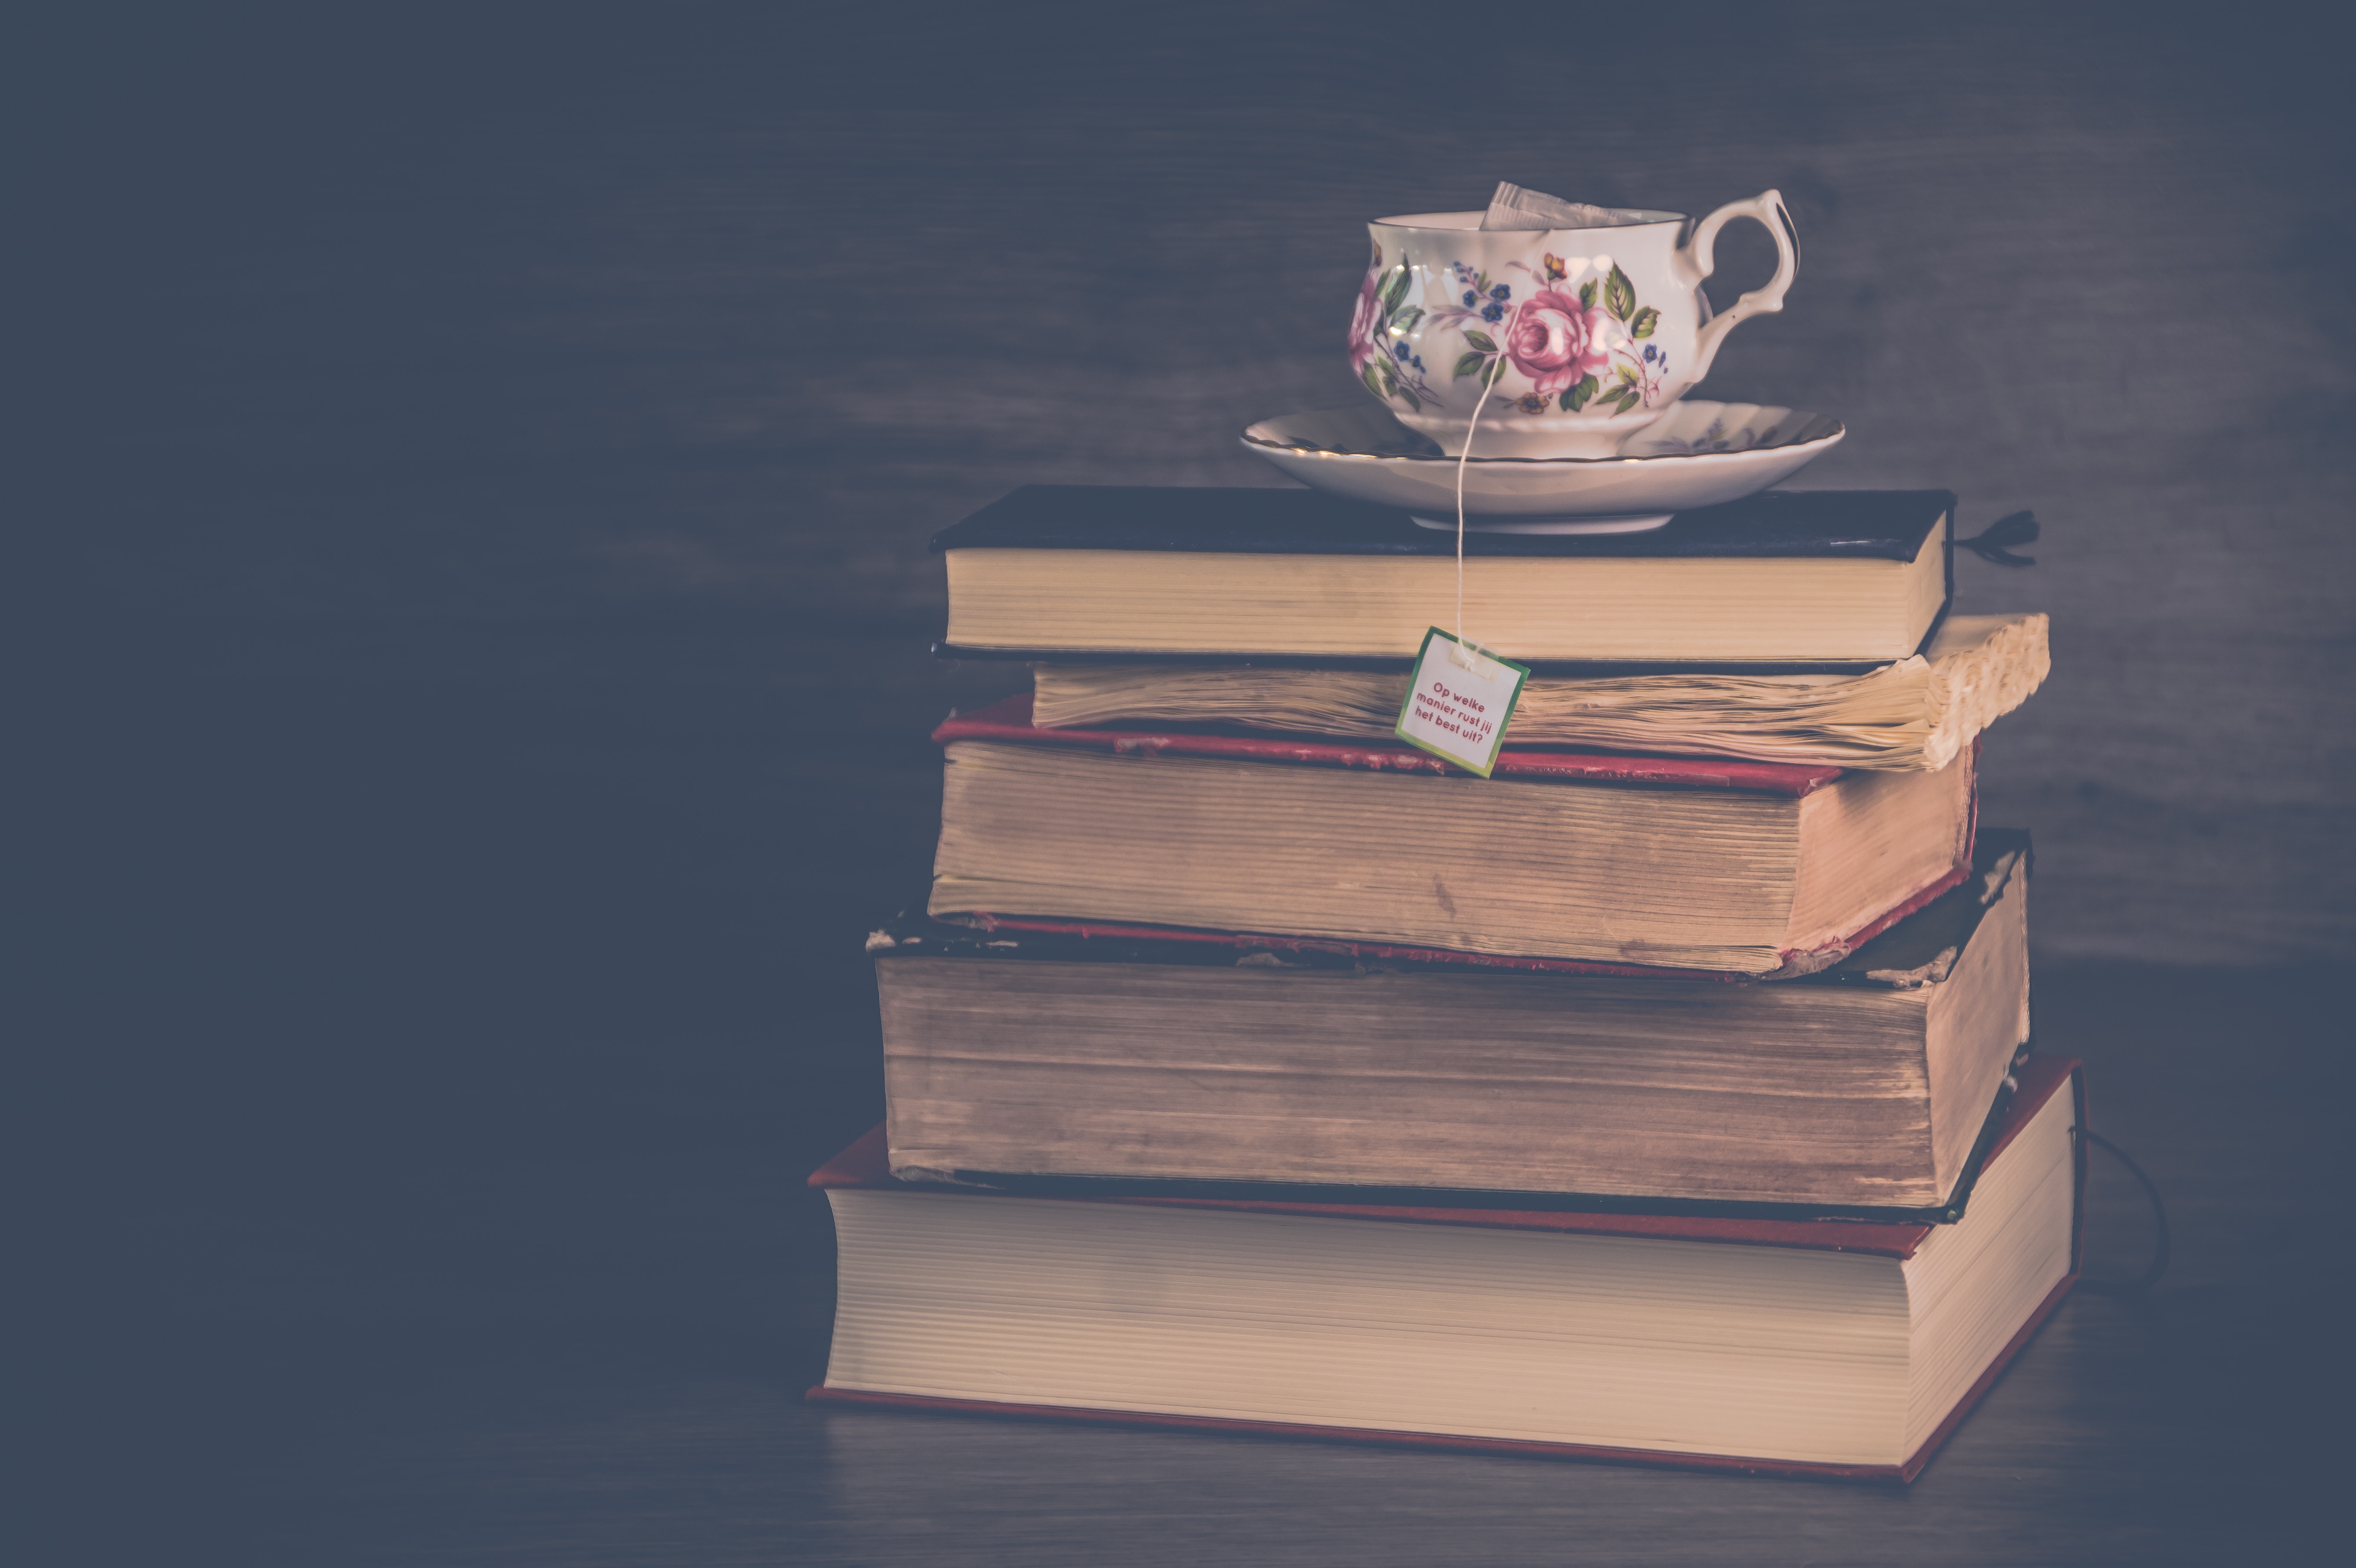 Pile of hardbound books with white and pink floral ceramic teacup and saucer photo